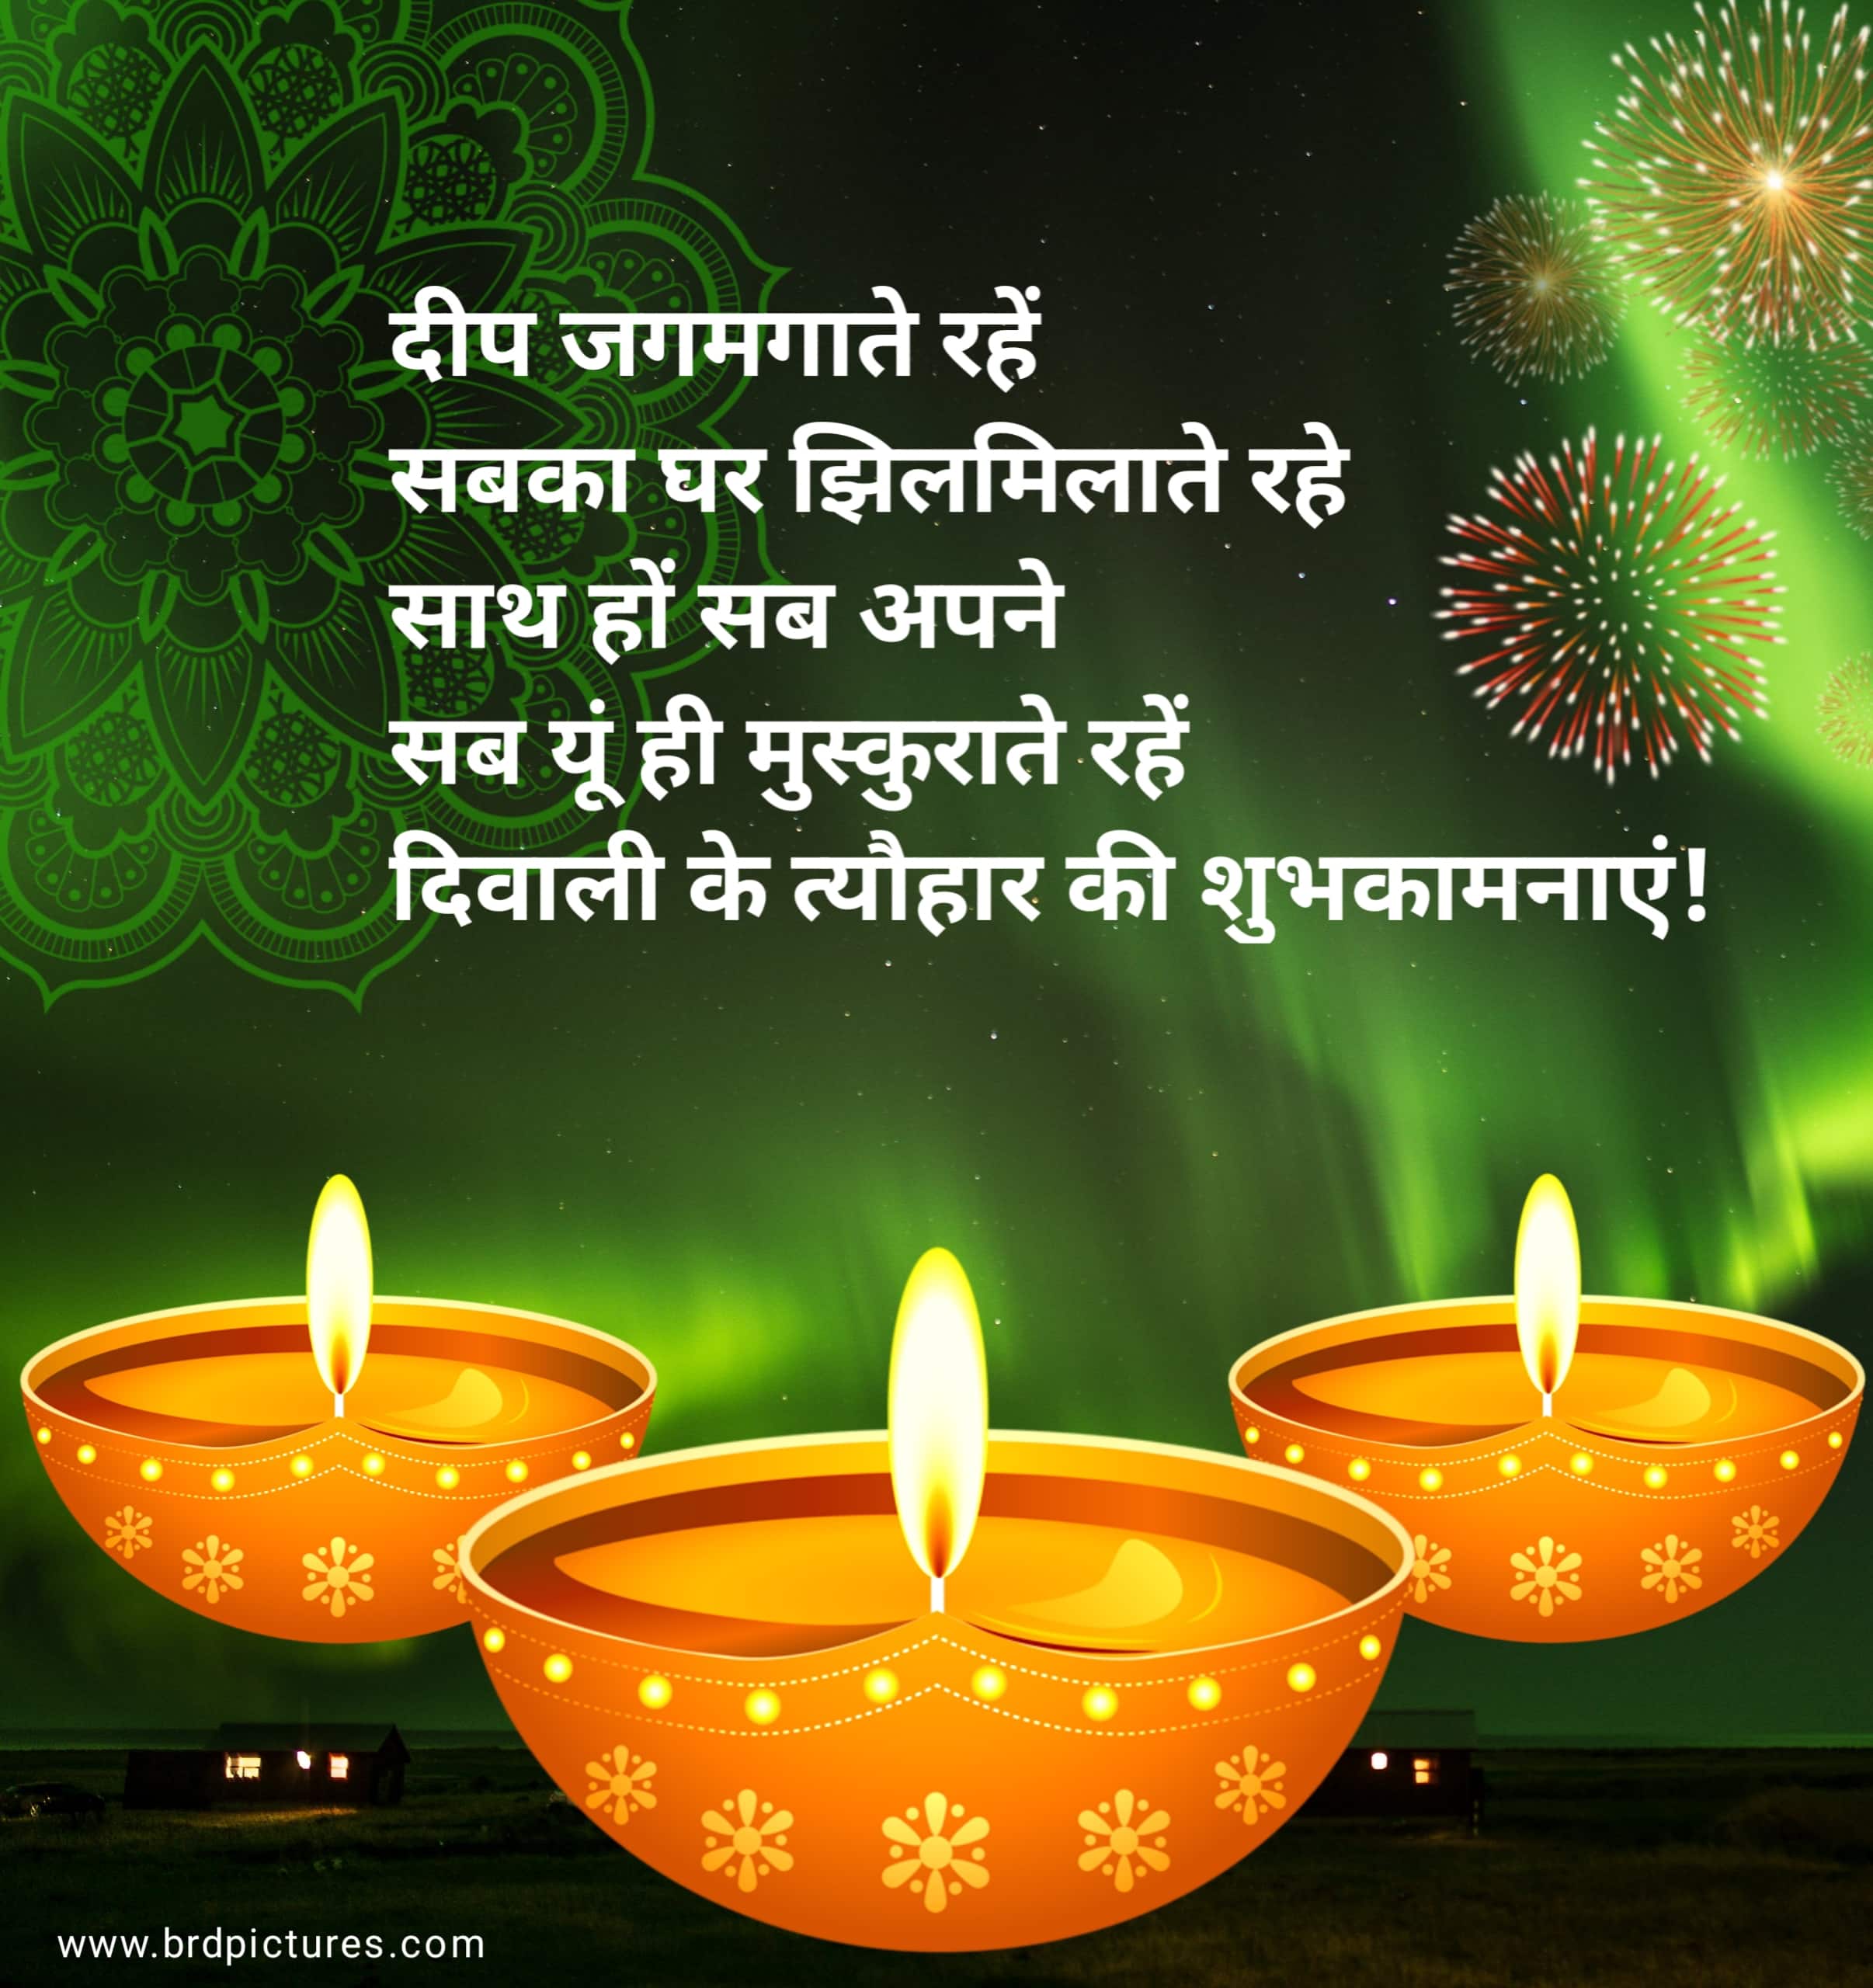 Diwali Wishes Image With Quote 